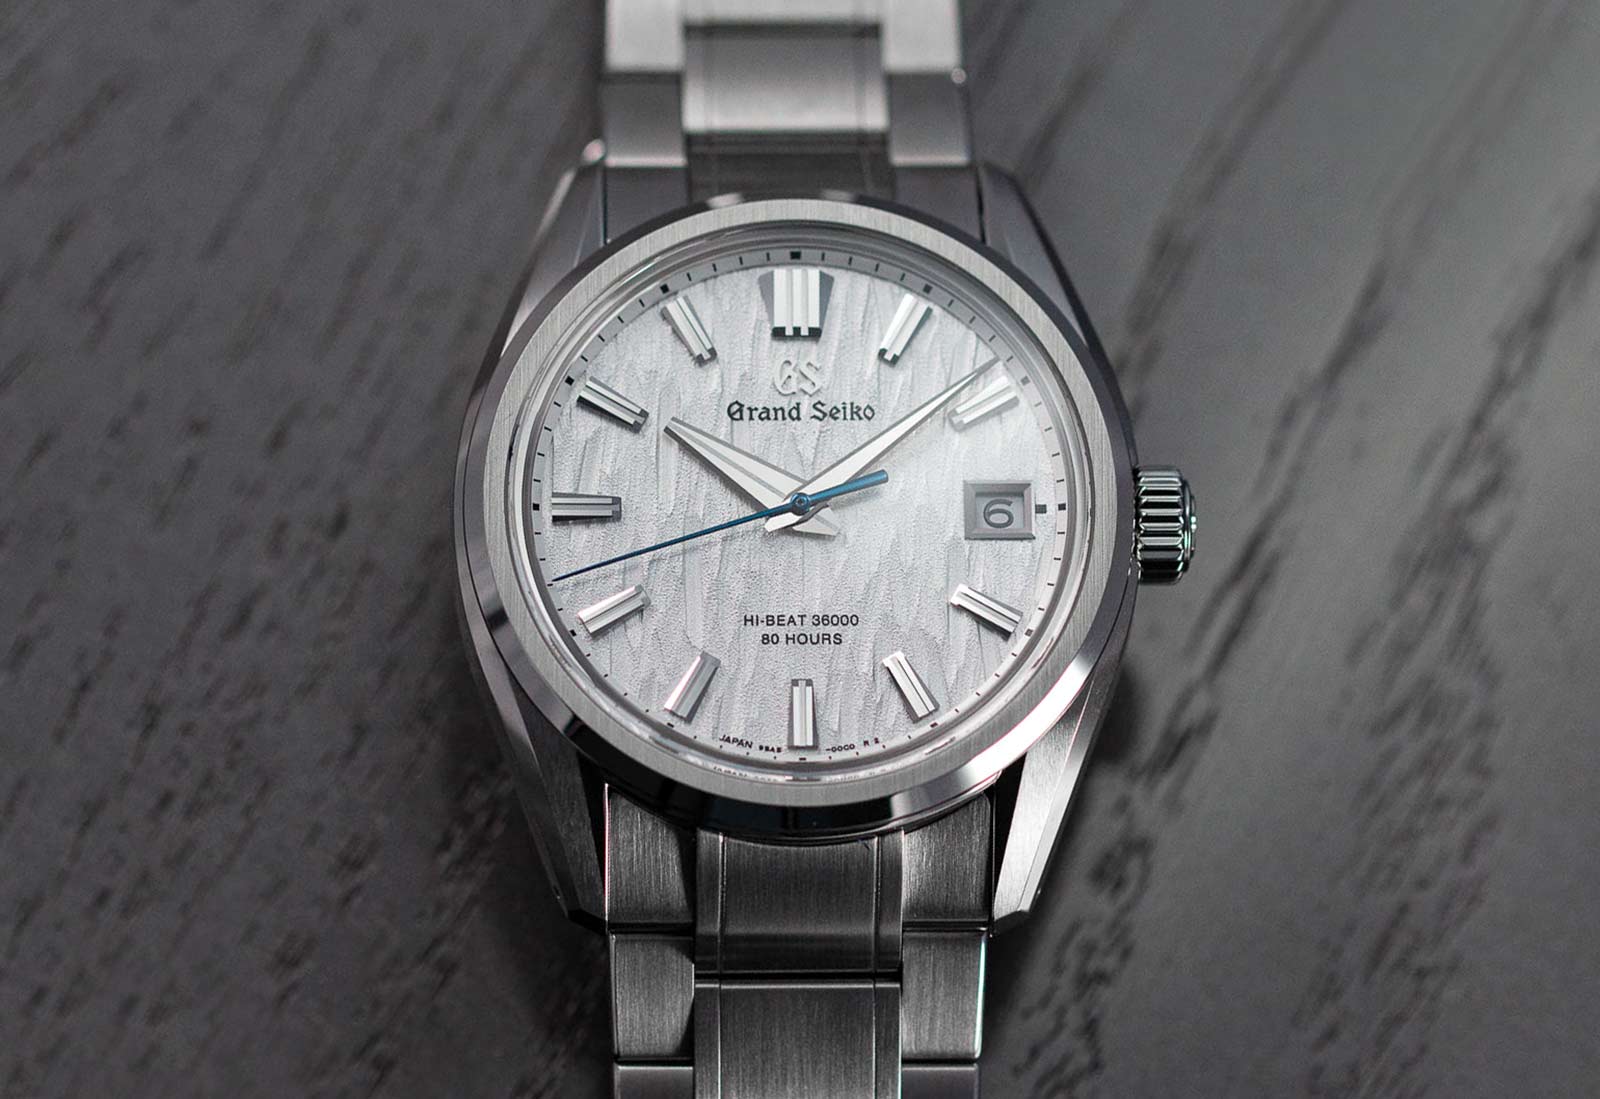 Grand Seiko - Heritage SLGH005 | Time and Watches | The watch blog